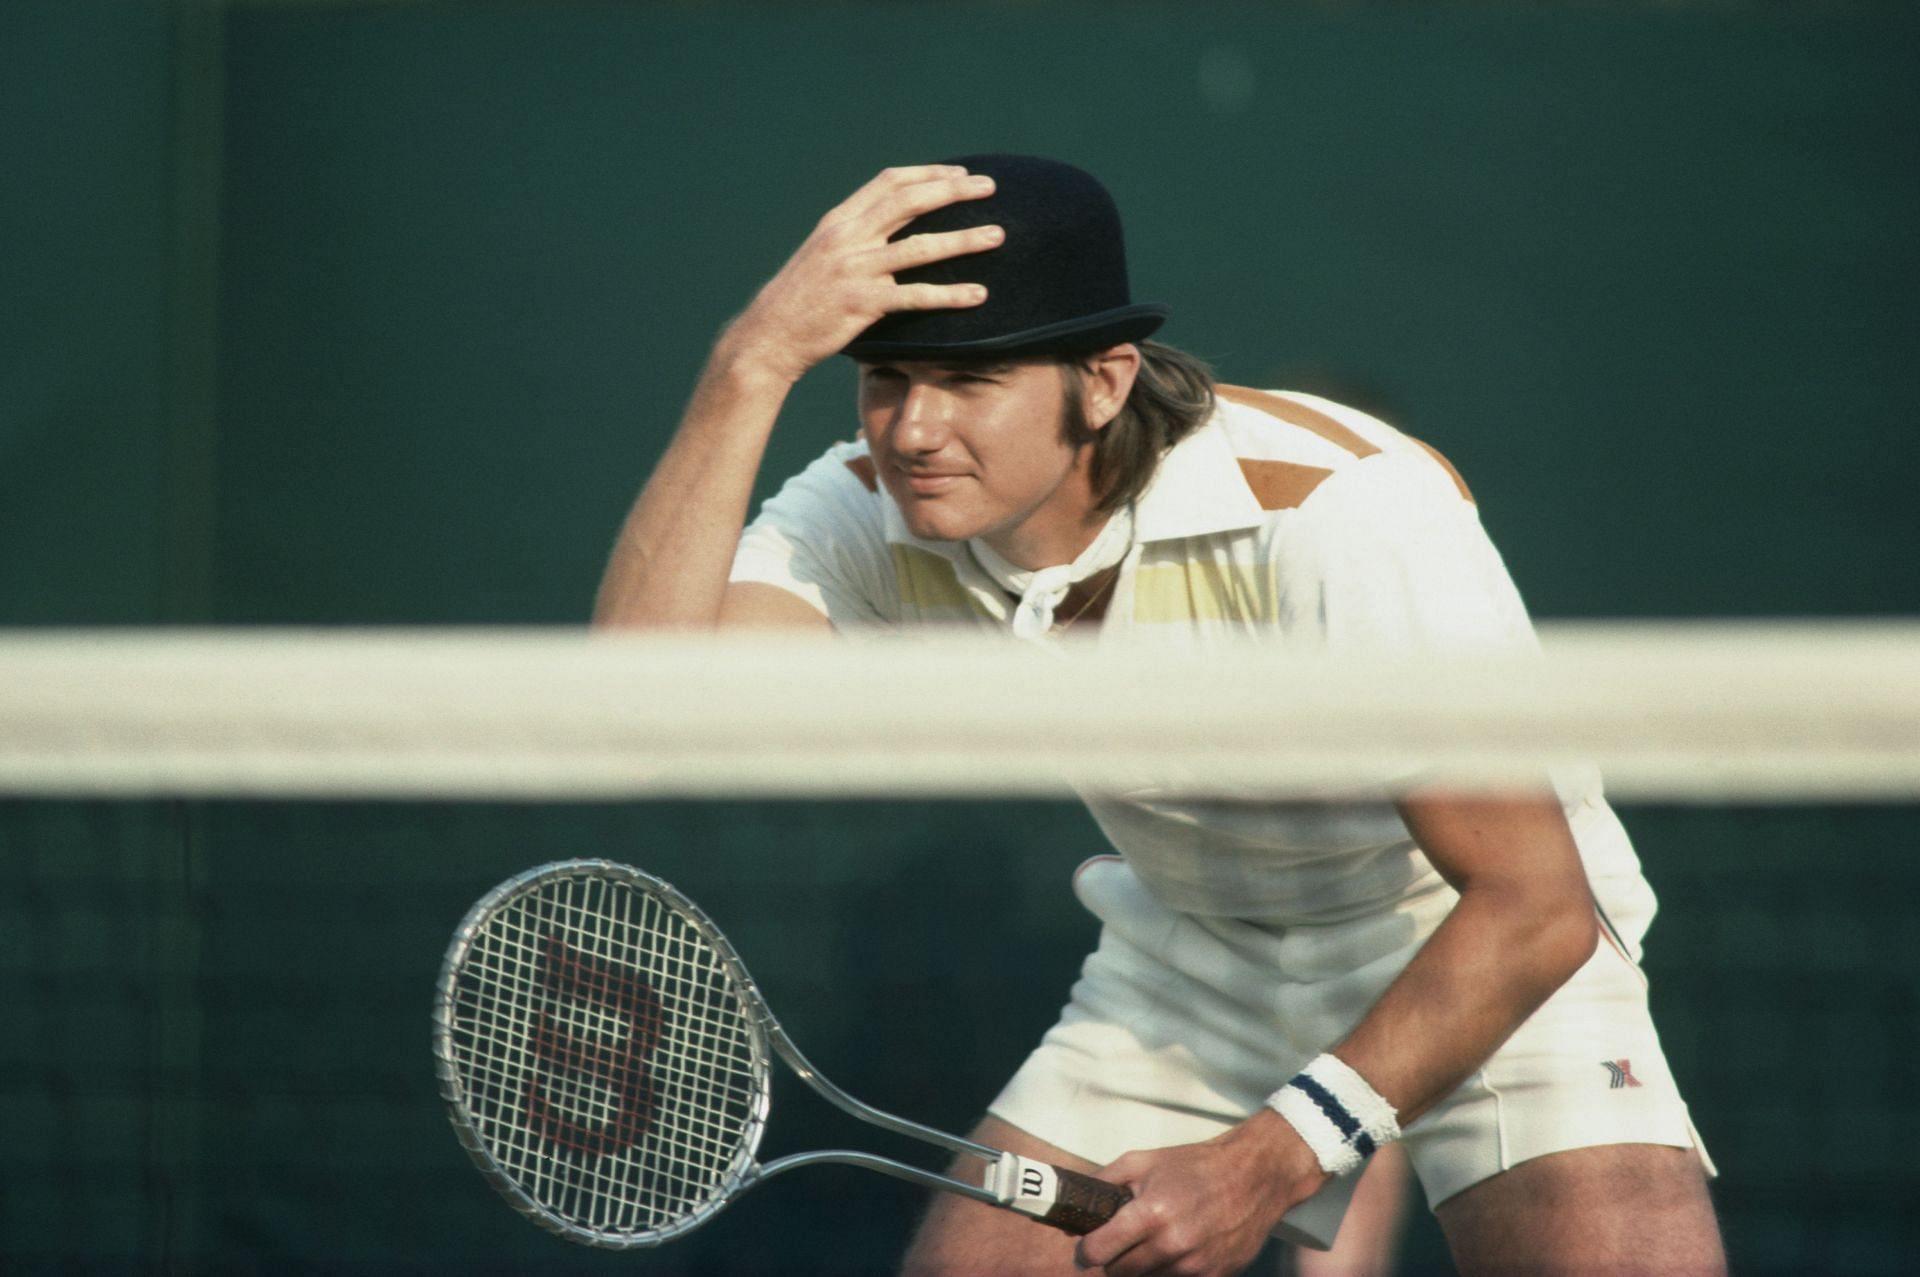 Jimmy Connors has five titles at the US Open